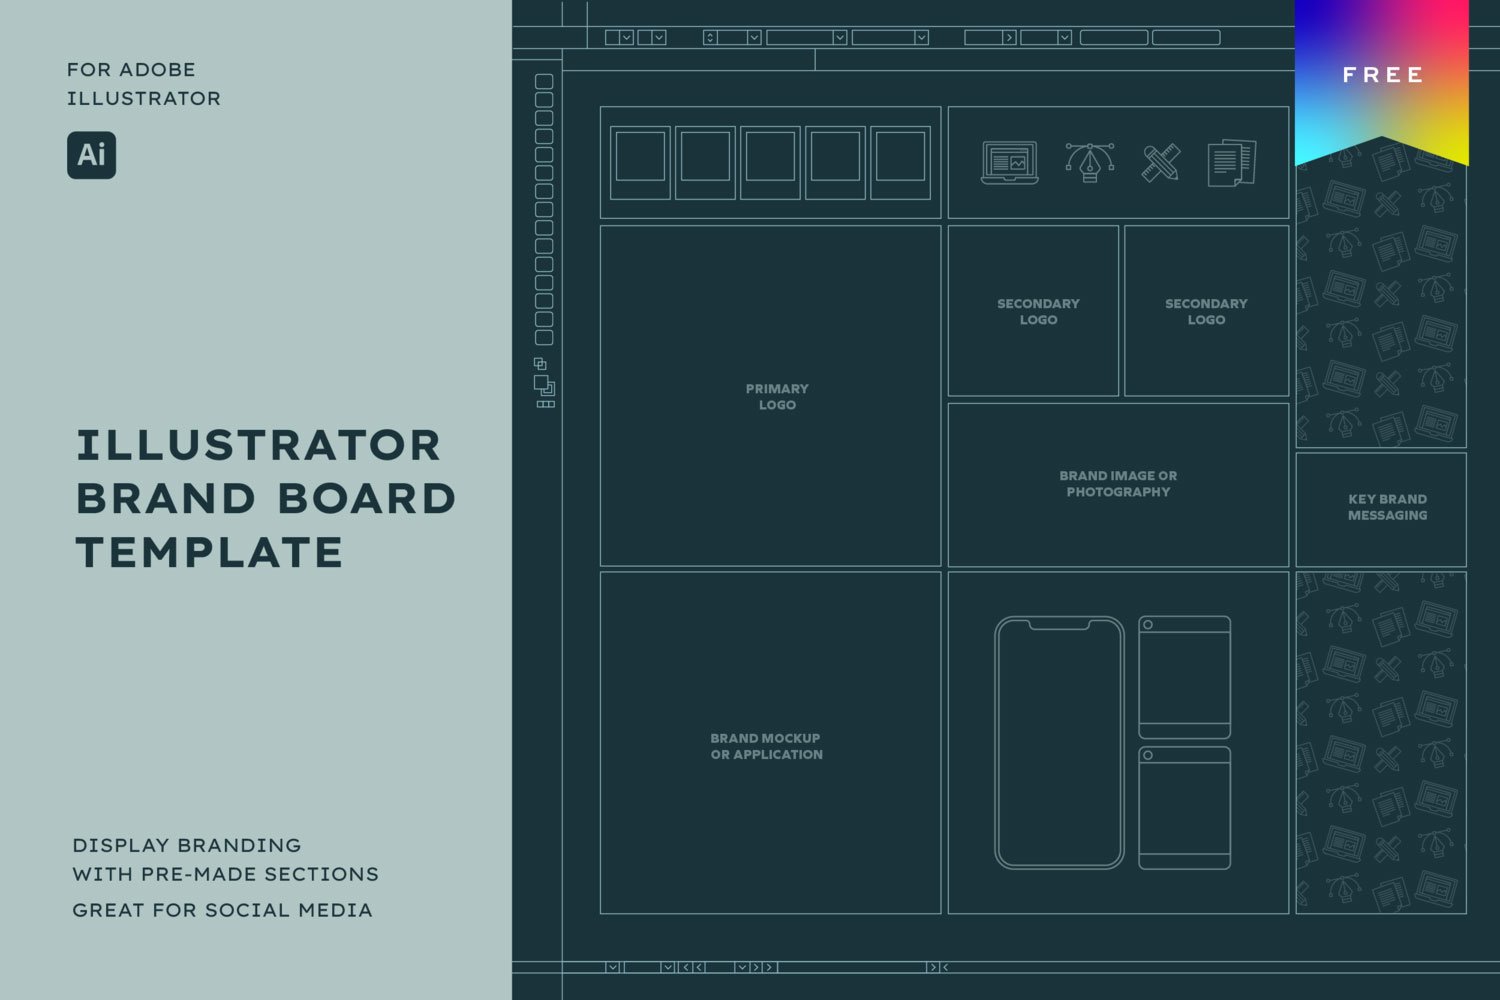 free-adobe-illustrator-brand-board-template-with-mobile-and-instagram